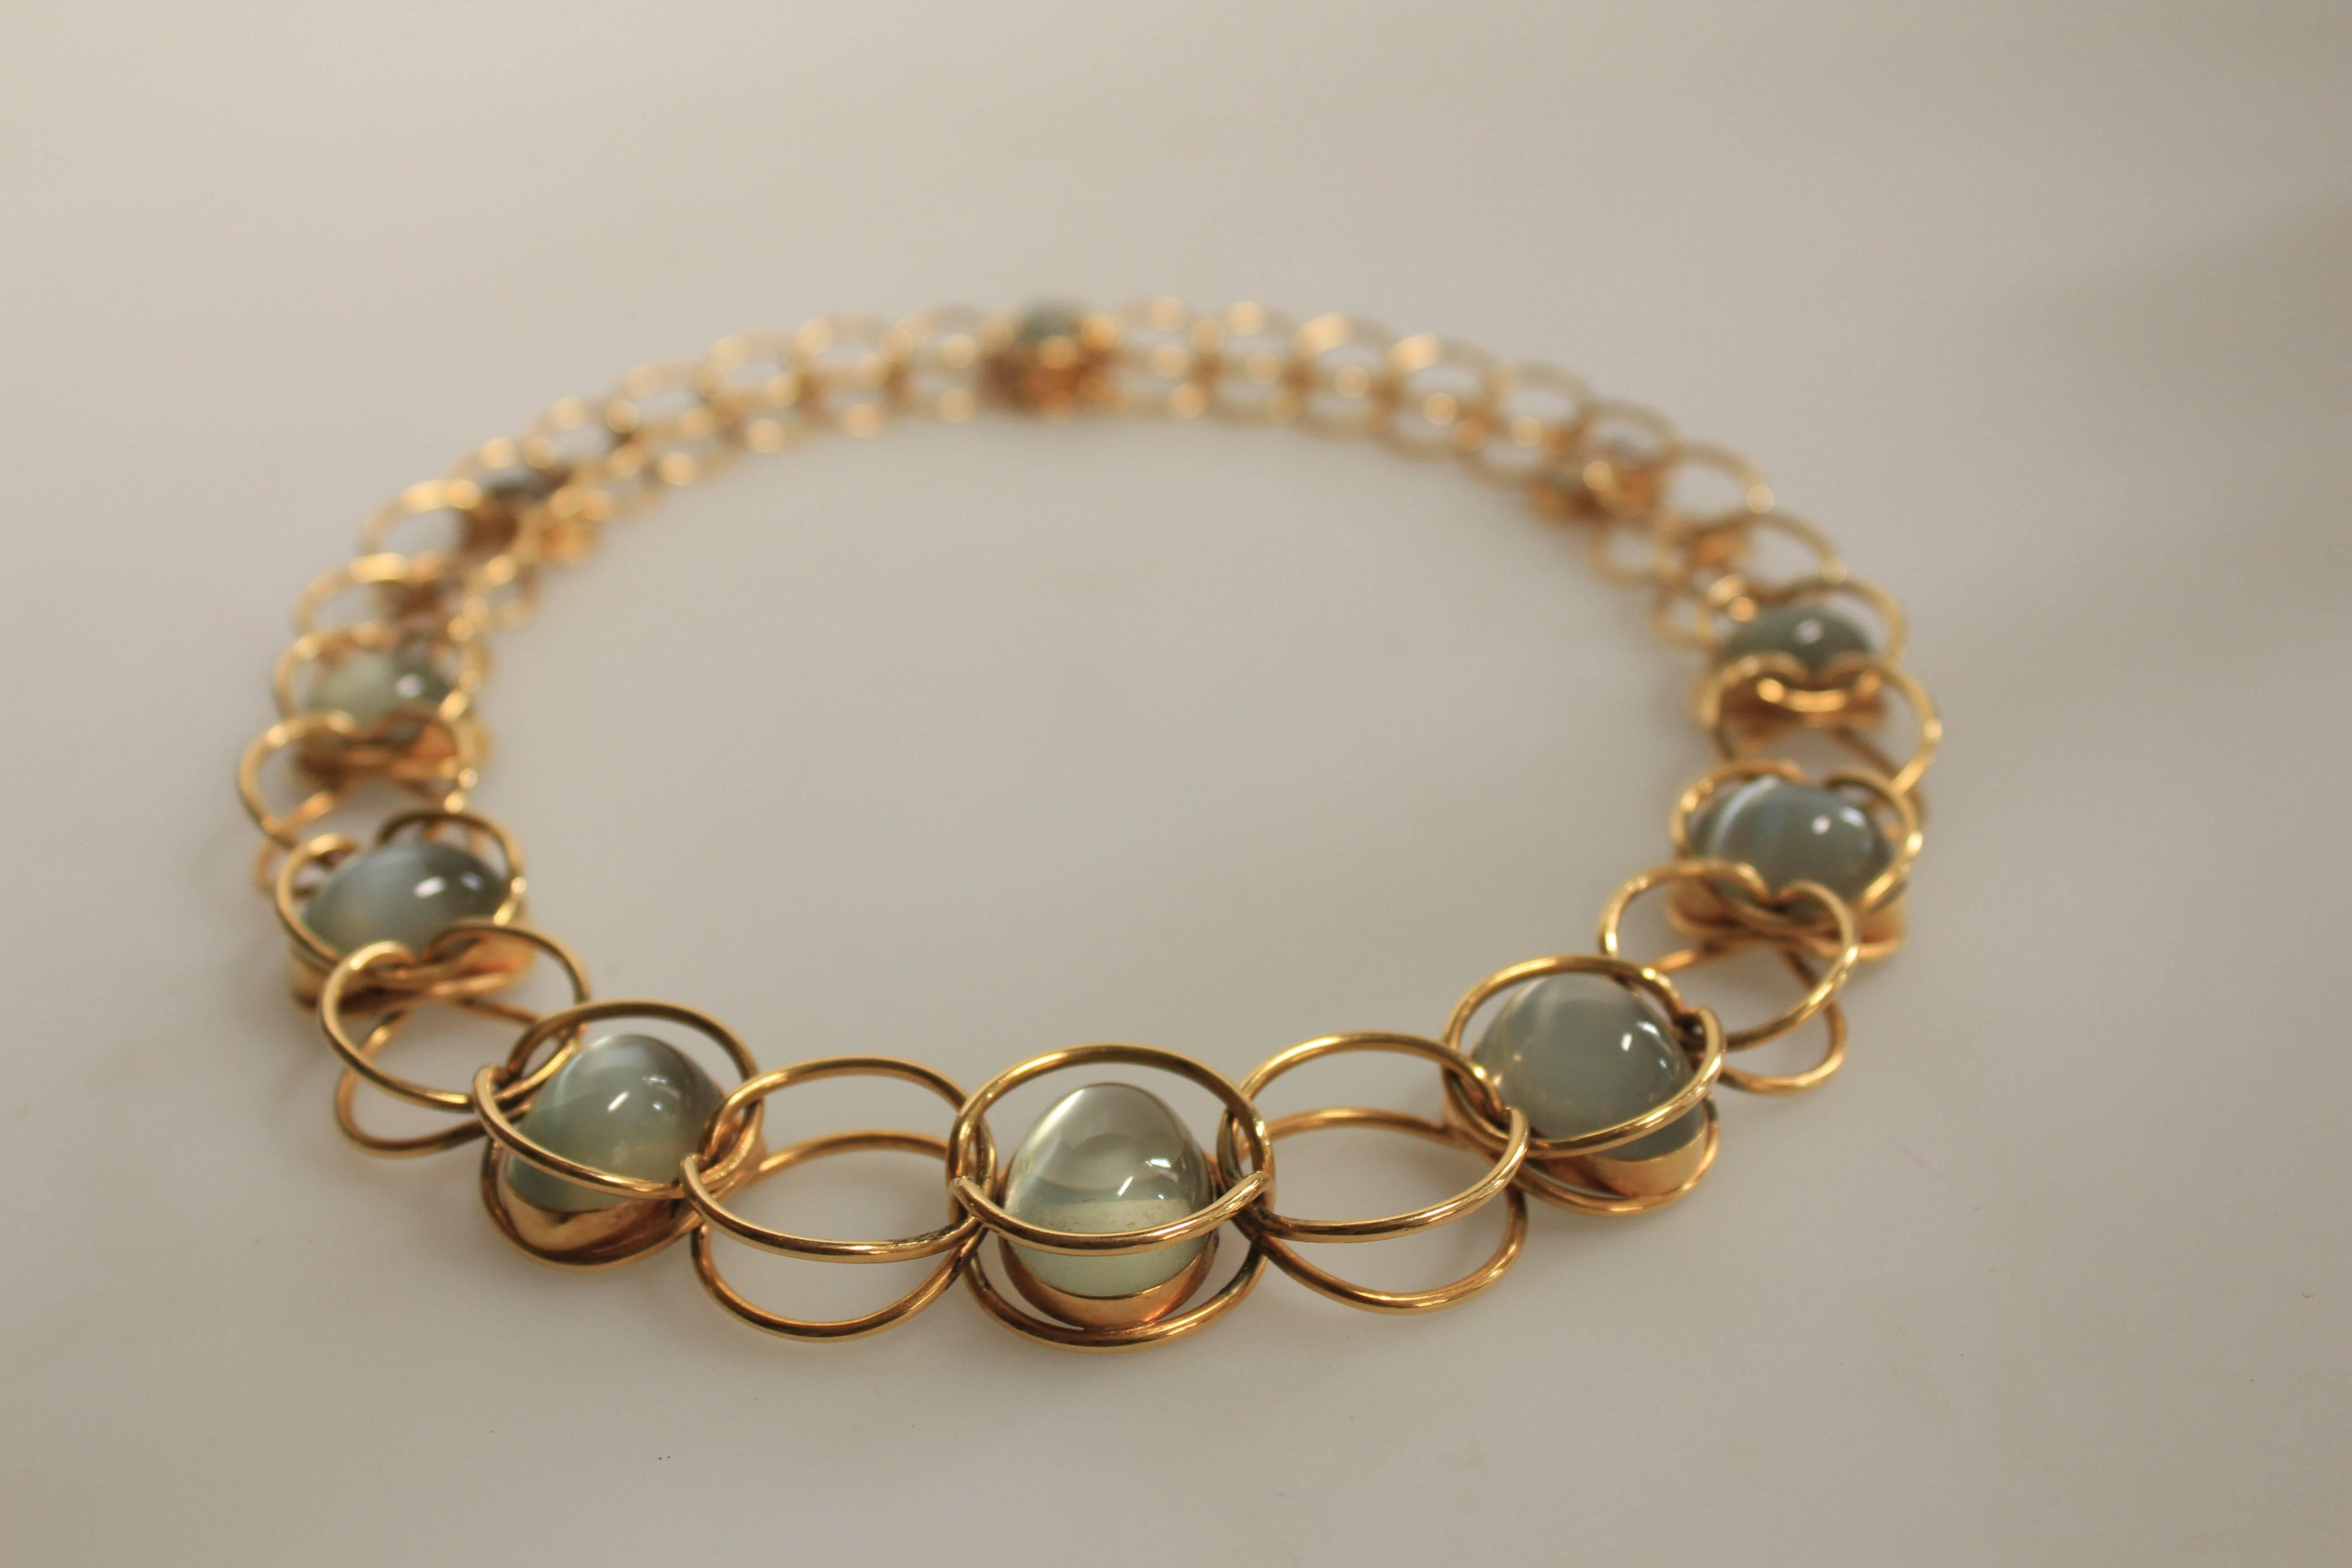 Set of: 
Necklace Design # 806
Bracelet Design  #1161A
18K gold and moonstones
Ca 1970’
Necklace Marked : with post 1945 stamps (GEORG JENSEN in dotted oval) - British import control marks
